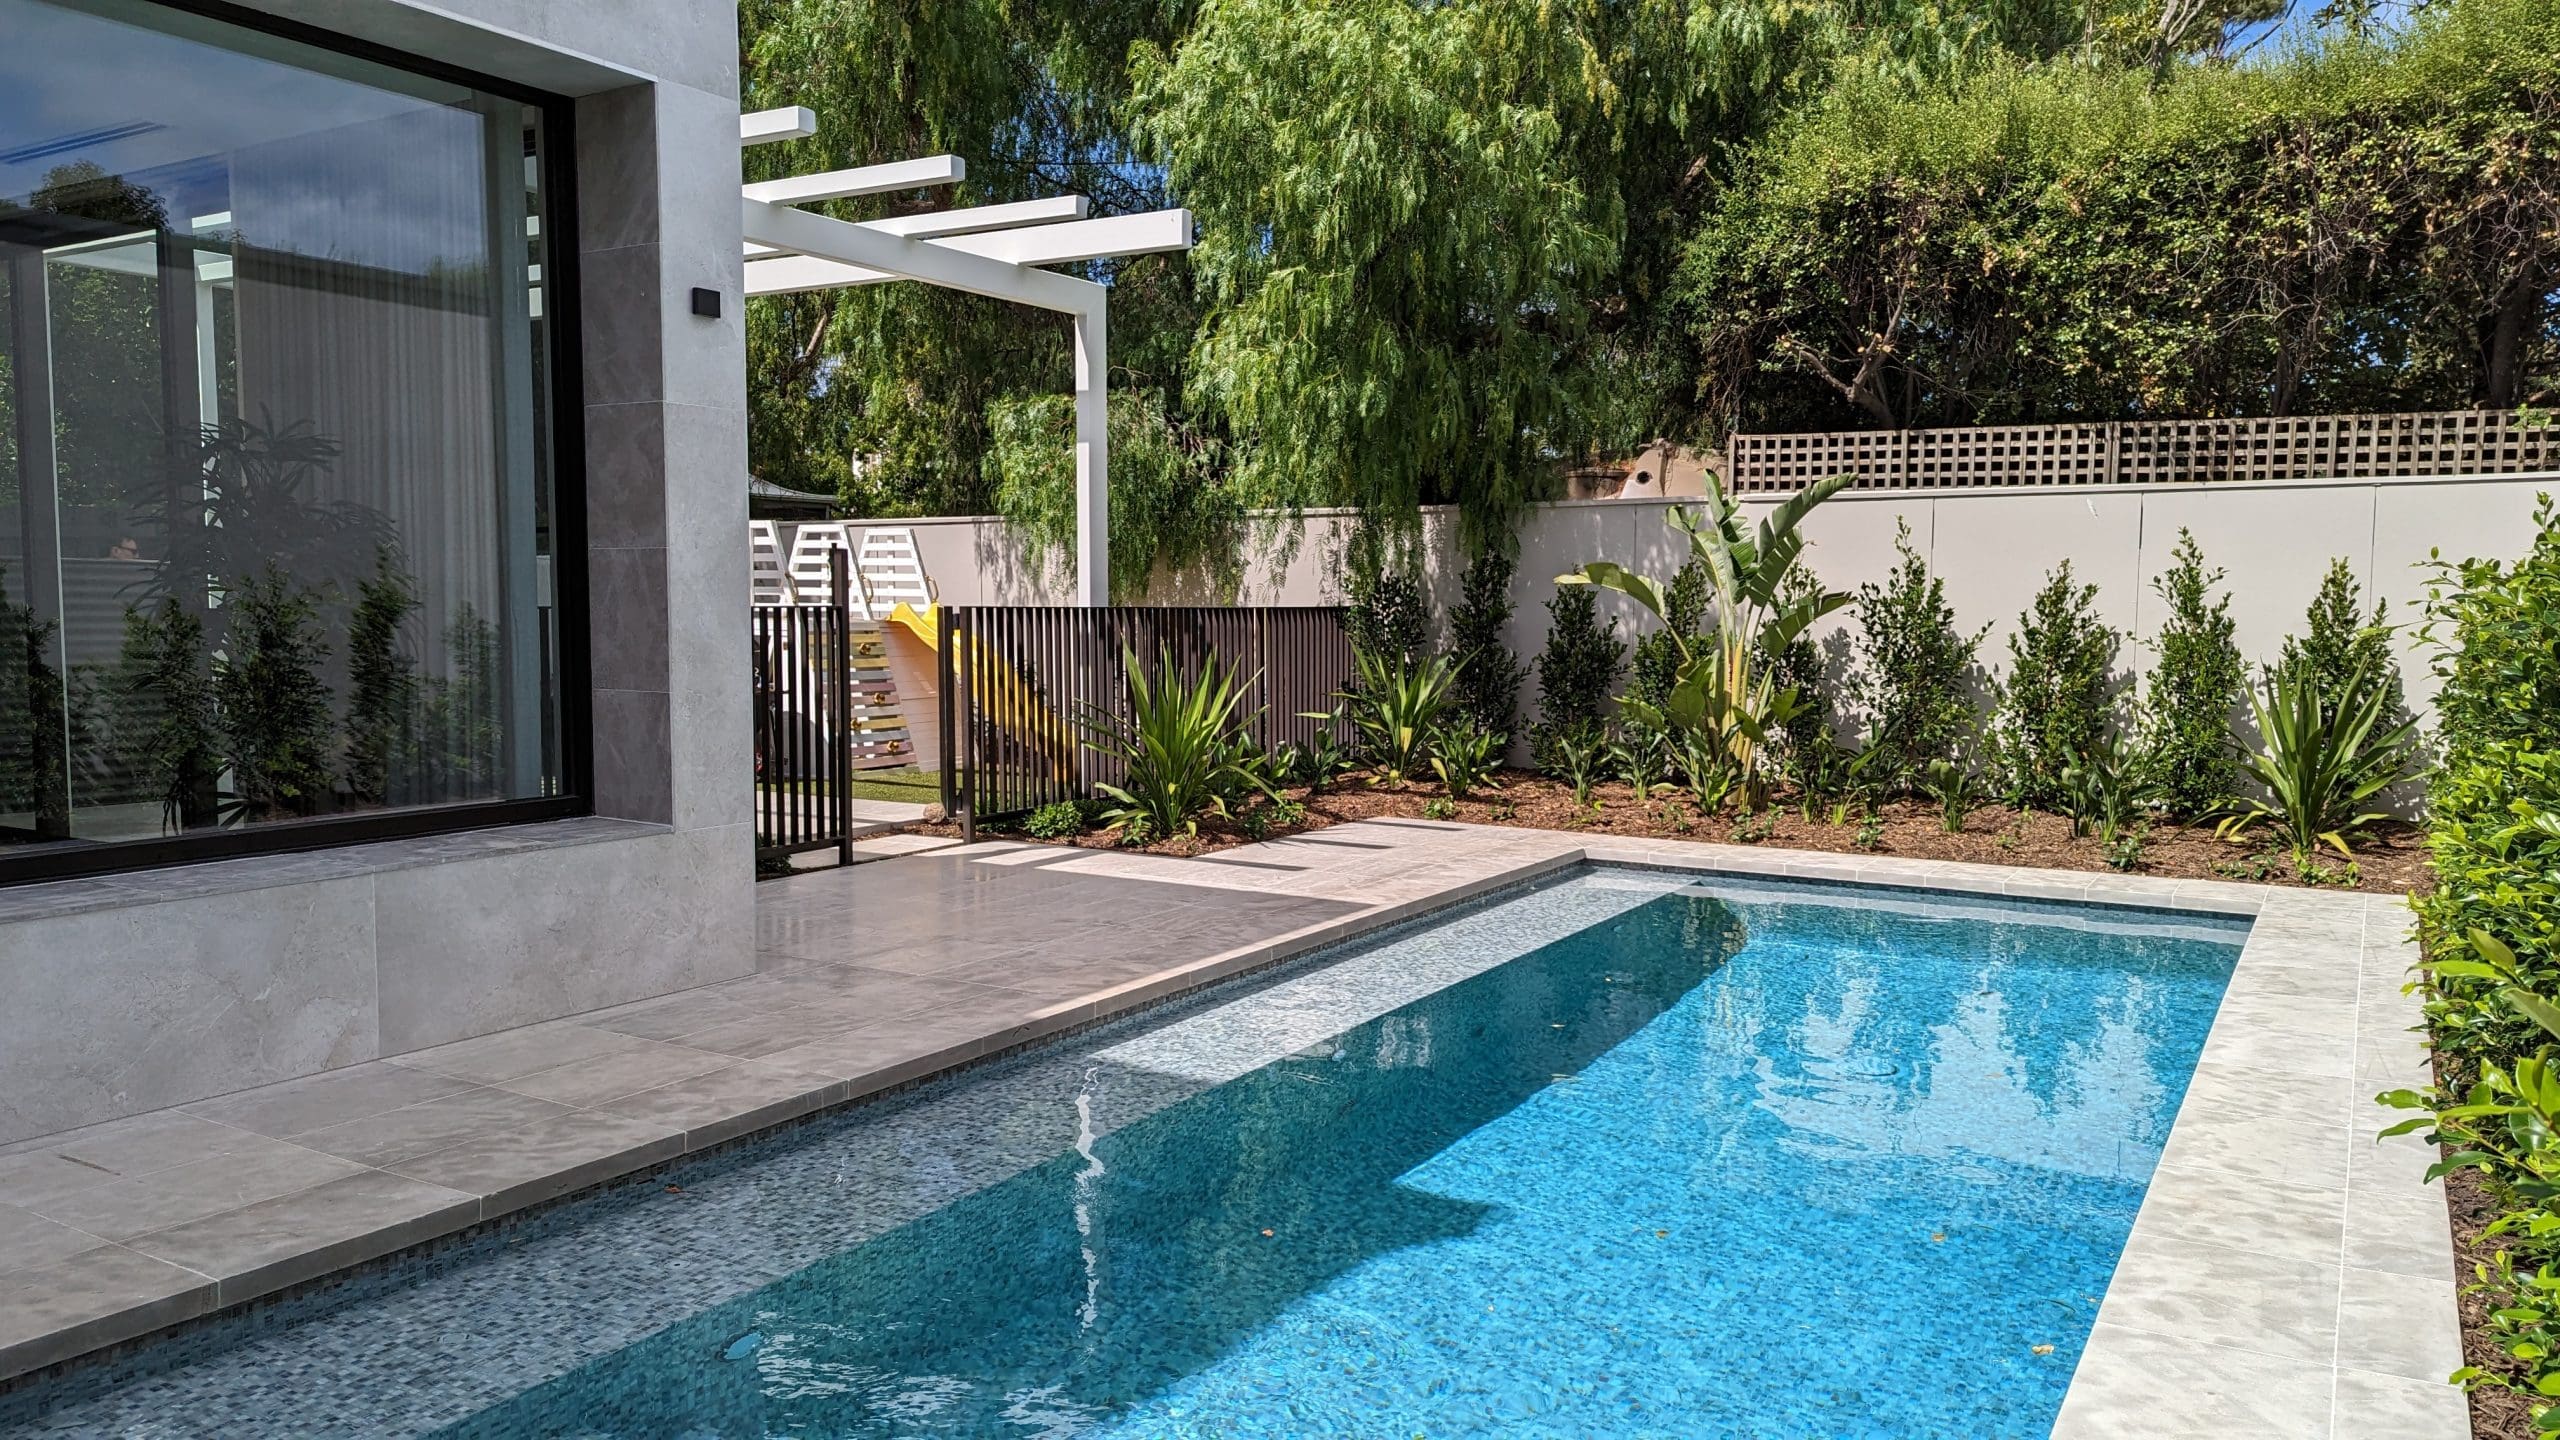 MADDISON BRUSHED & TUMBLED LIMESTONE_RMS TRADERS_NATURAL STONE GREY PAVERS POOL COPING TILES SUPPLIER MELBOURNE (12)